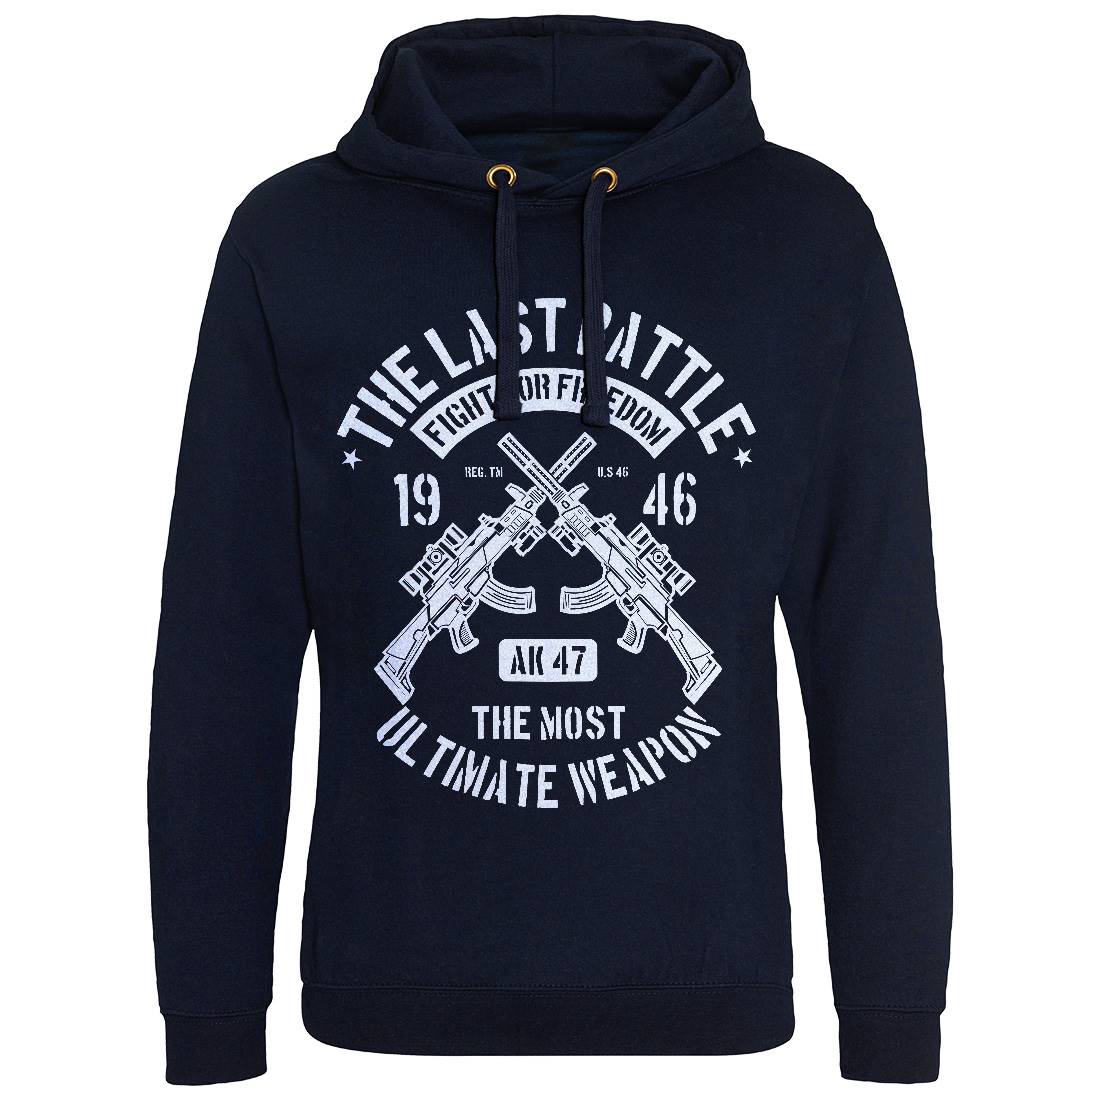 Last Battle Mens Hoodie Without Pocket Army A174